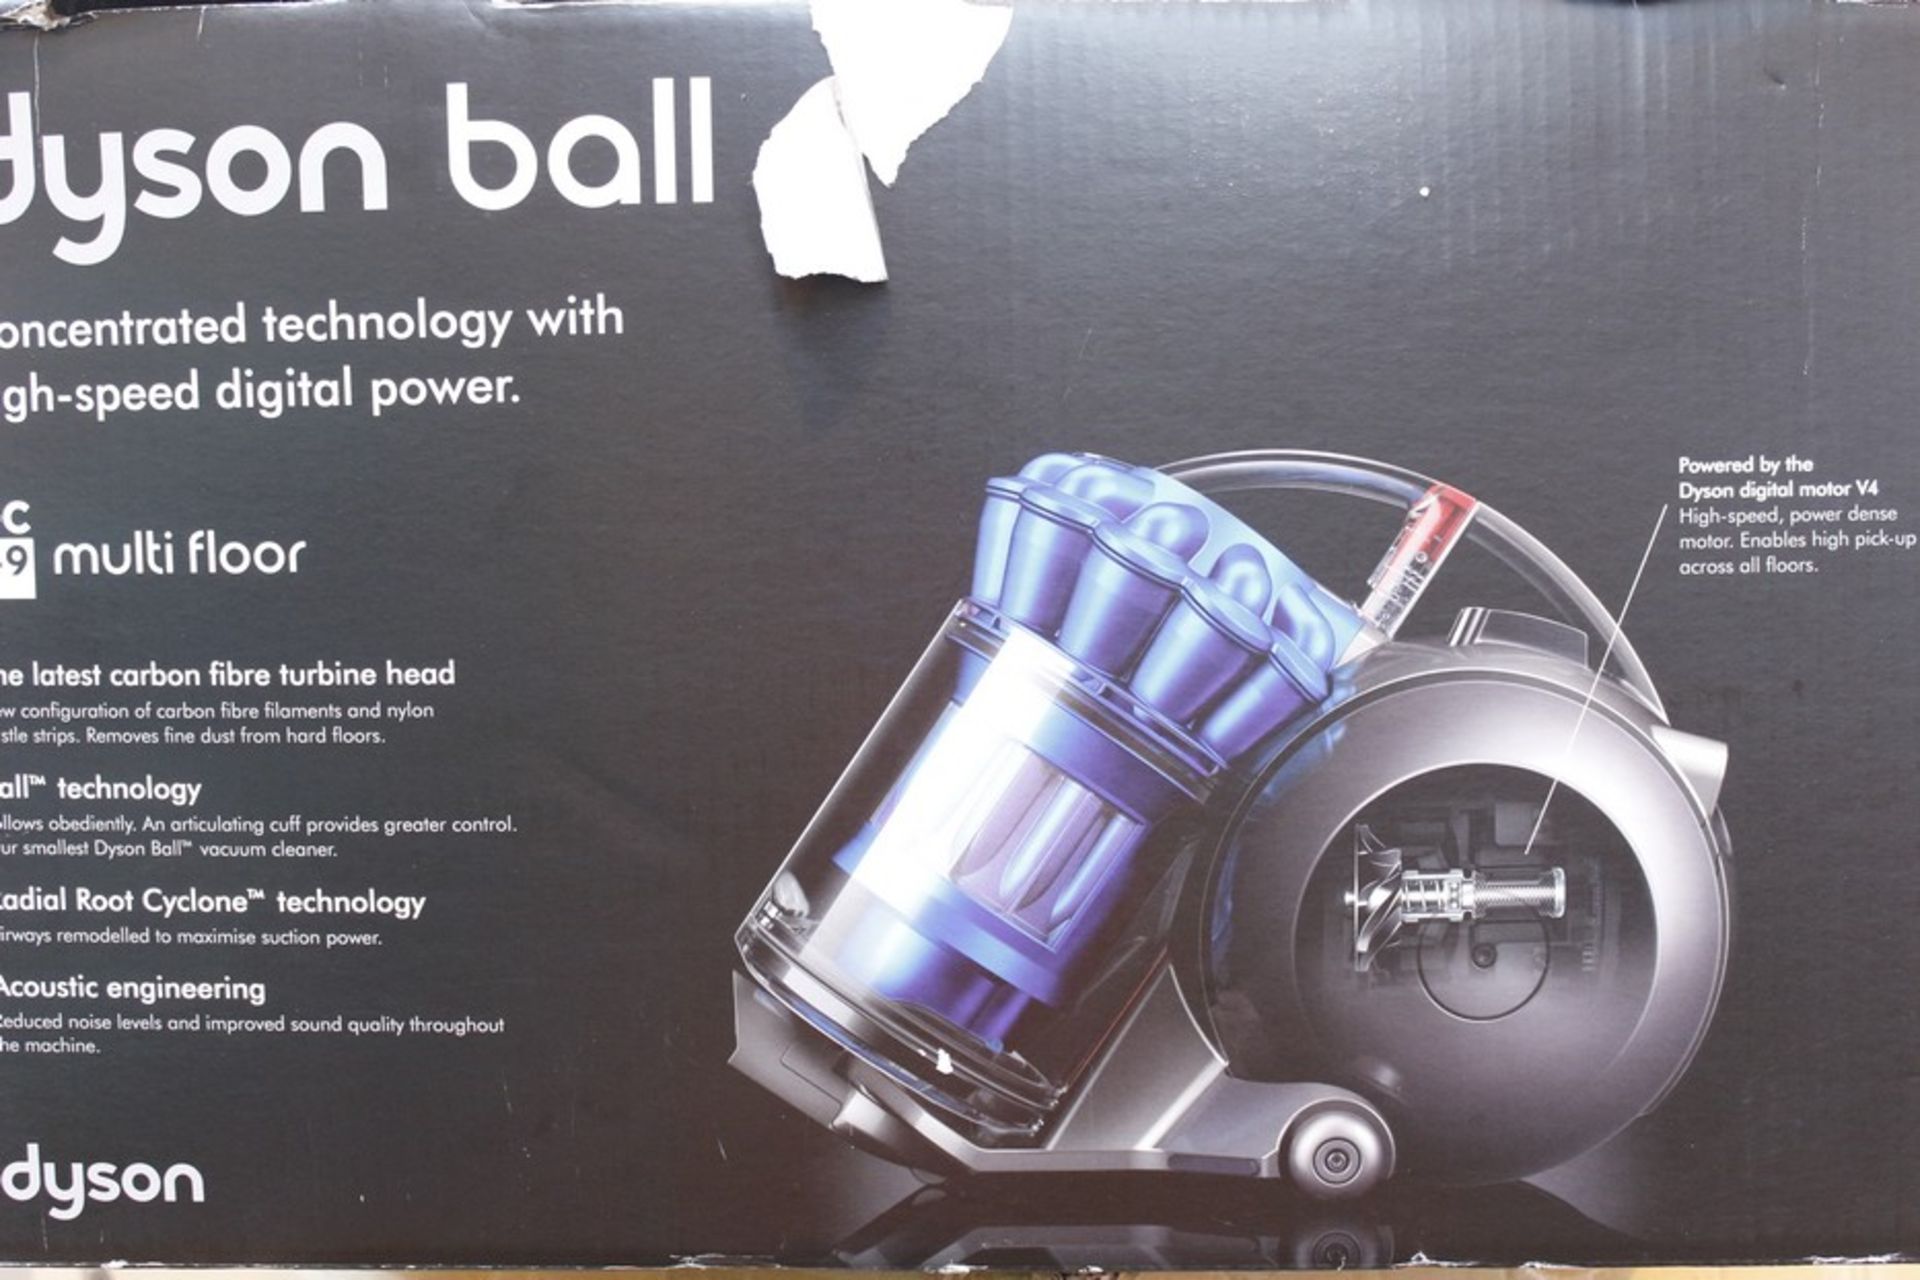 1 x BOXED DYSON DC49 MULTI FLOOR CYLINDER VACUUM CLEANER (588378) RRP £350  *PLEASE NOTE THAT THE